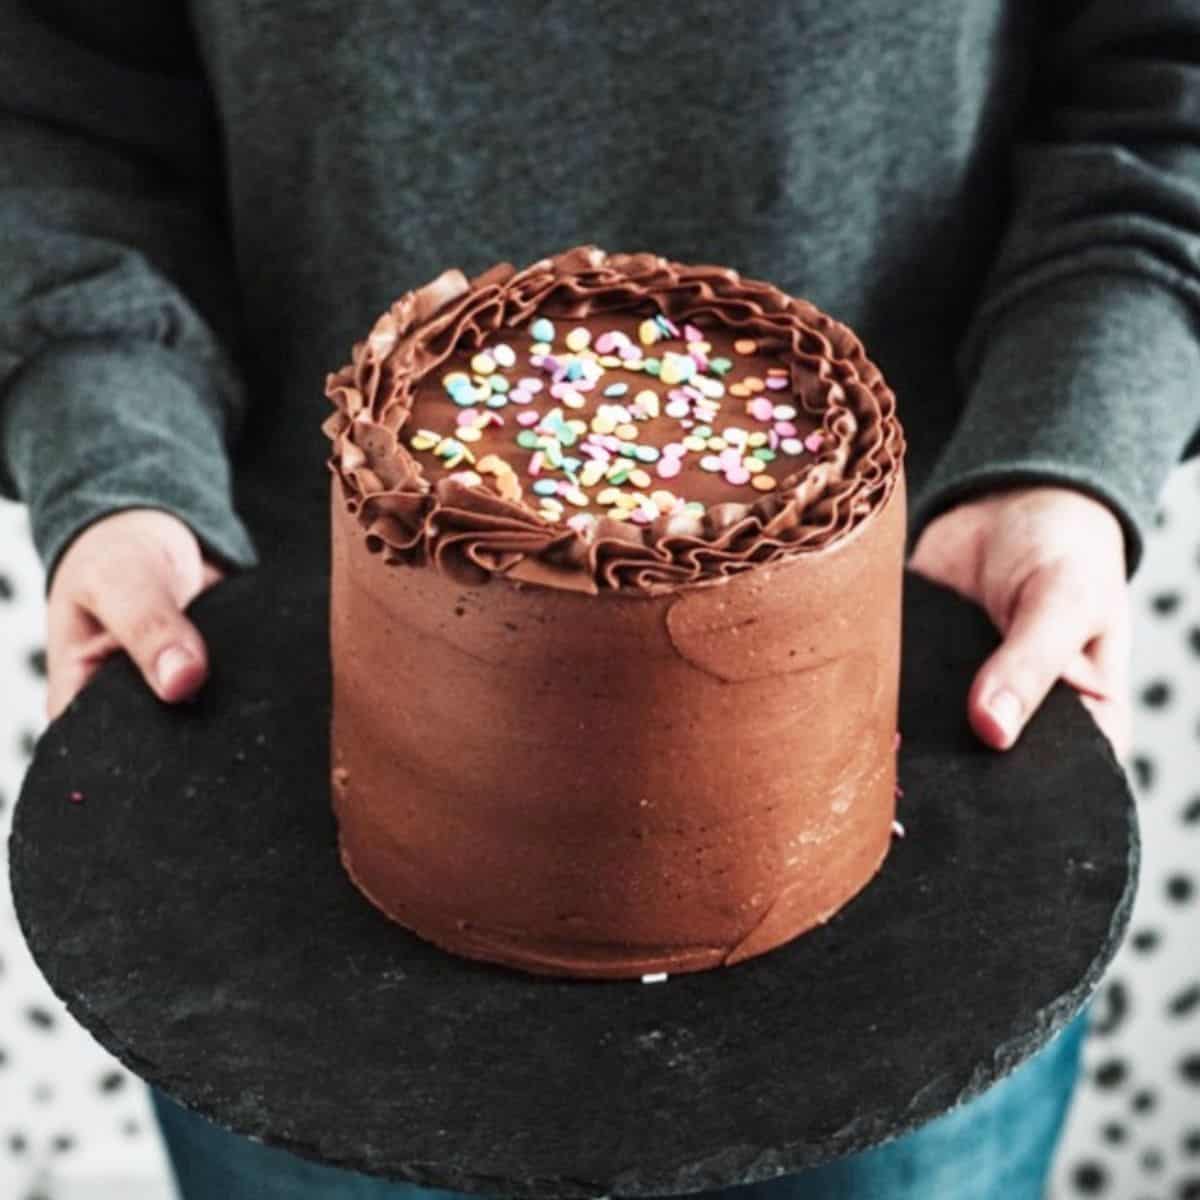 holding a 6'' chocolate cake on a board in front of body
